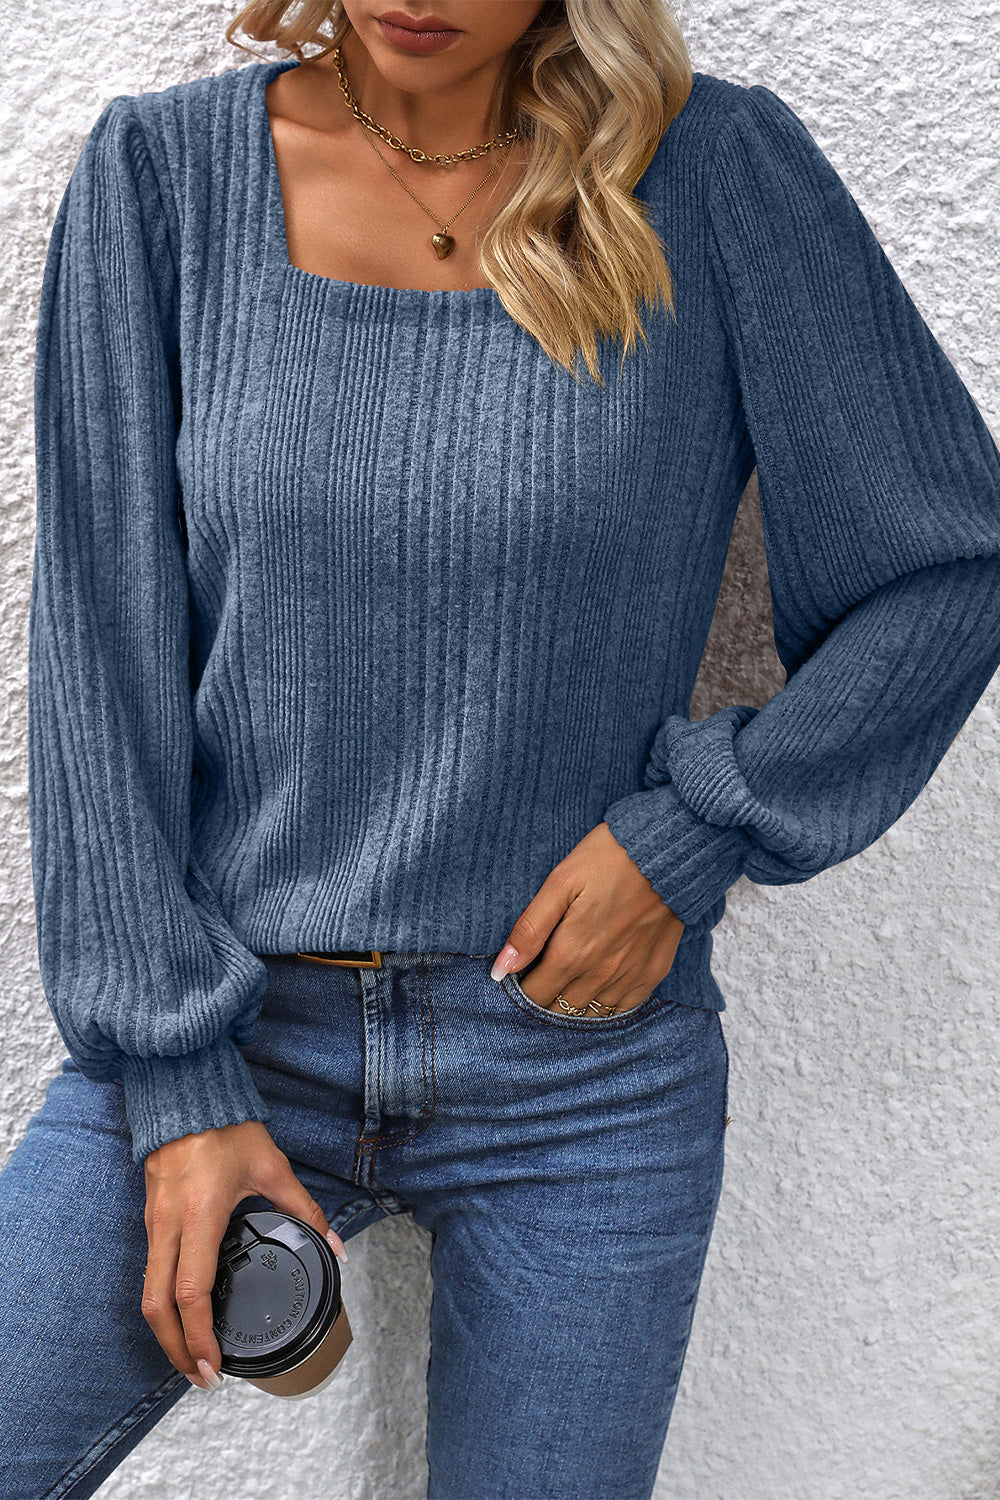 Square Neck Puff Sleeve Blouse - Blue / S - Women’s Clothing & Accessories - Shirts & Tops - 13 - 2024